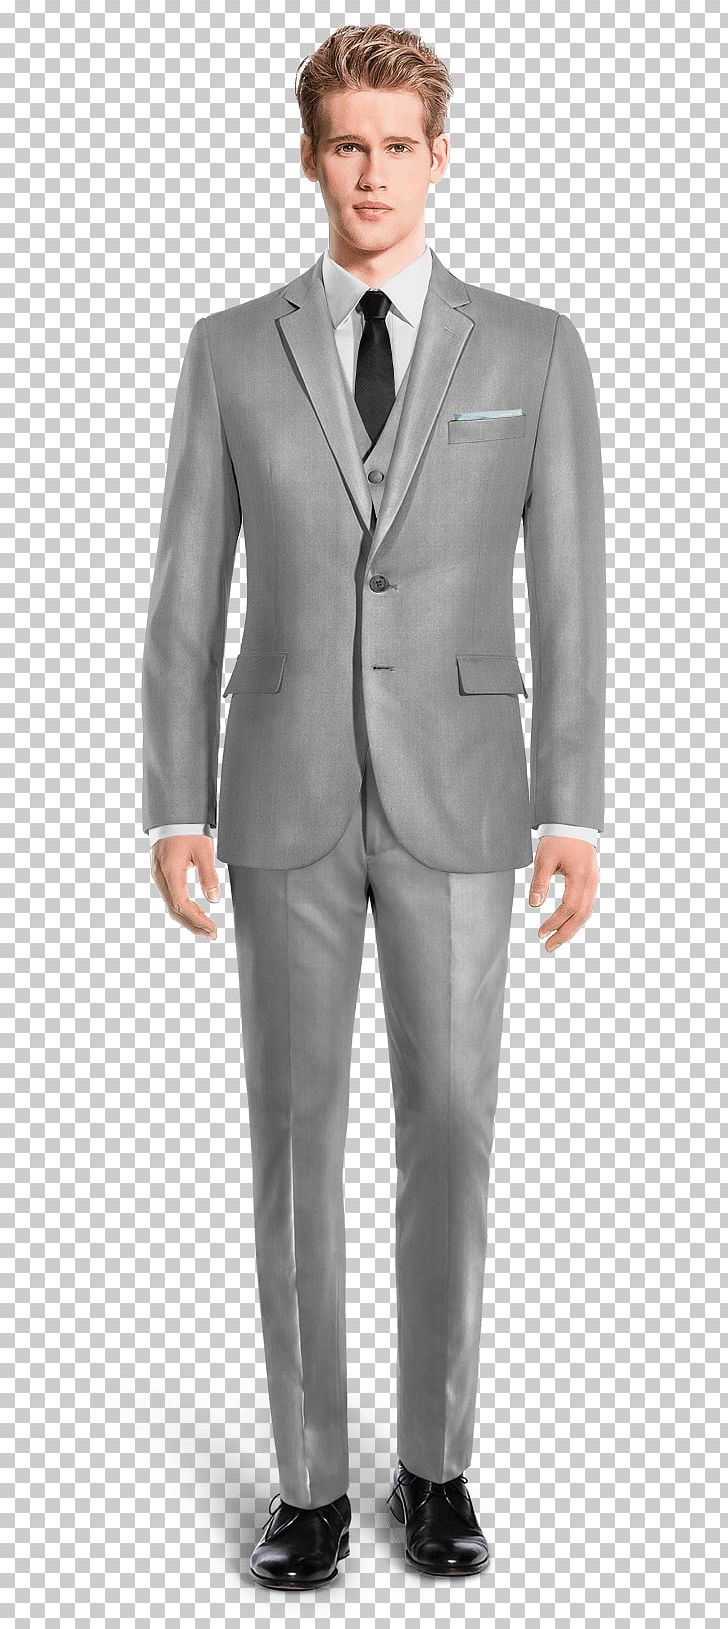 Double-breasted Suit Single-breasted Tuxedo Clothing PNG, Clipart, Blazer, Businessperson, Clothing, Costume, Doublebreasted Free PNG Download